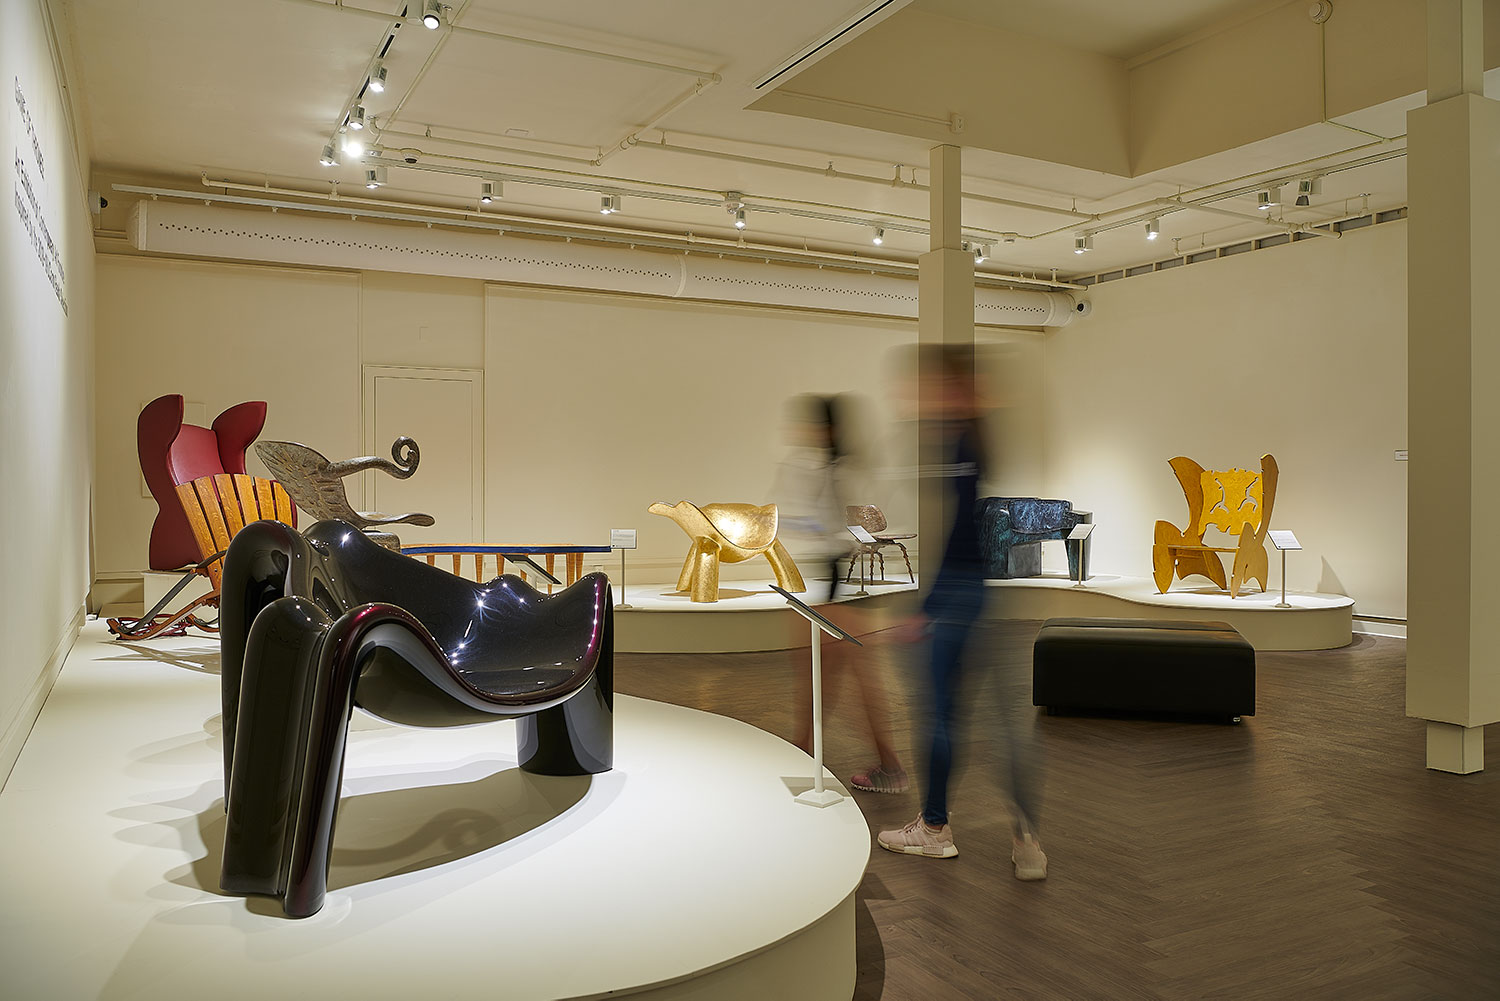 William Benton Museum of Art with a show of 13 chairs by contemporary artists entitled “Game of Thrones: An Exhibition of Contemporary Art Furniture.”